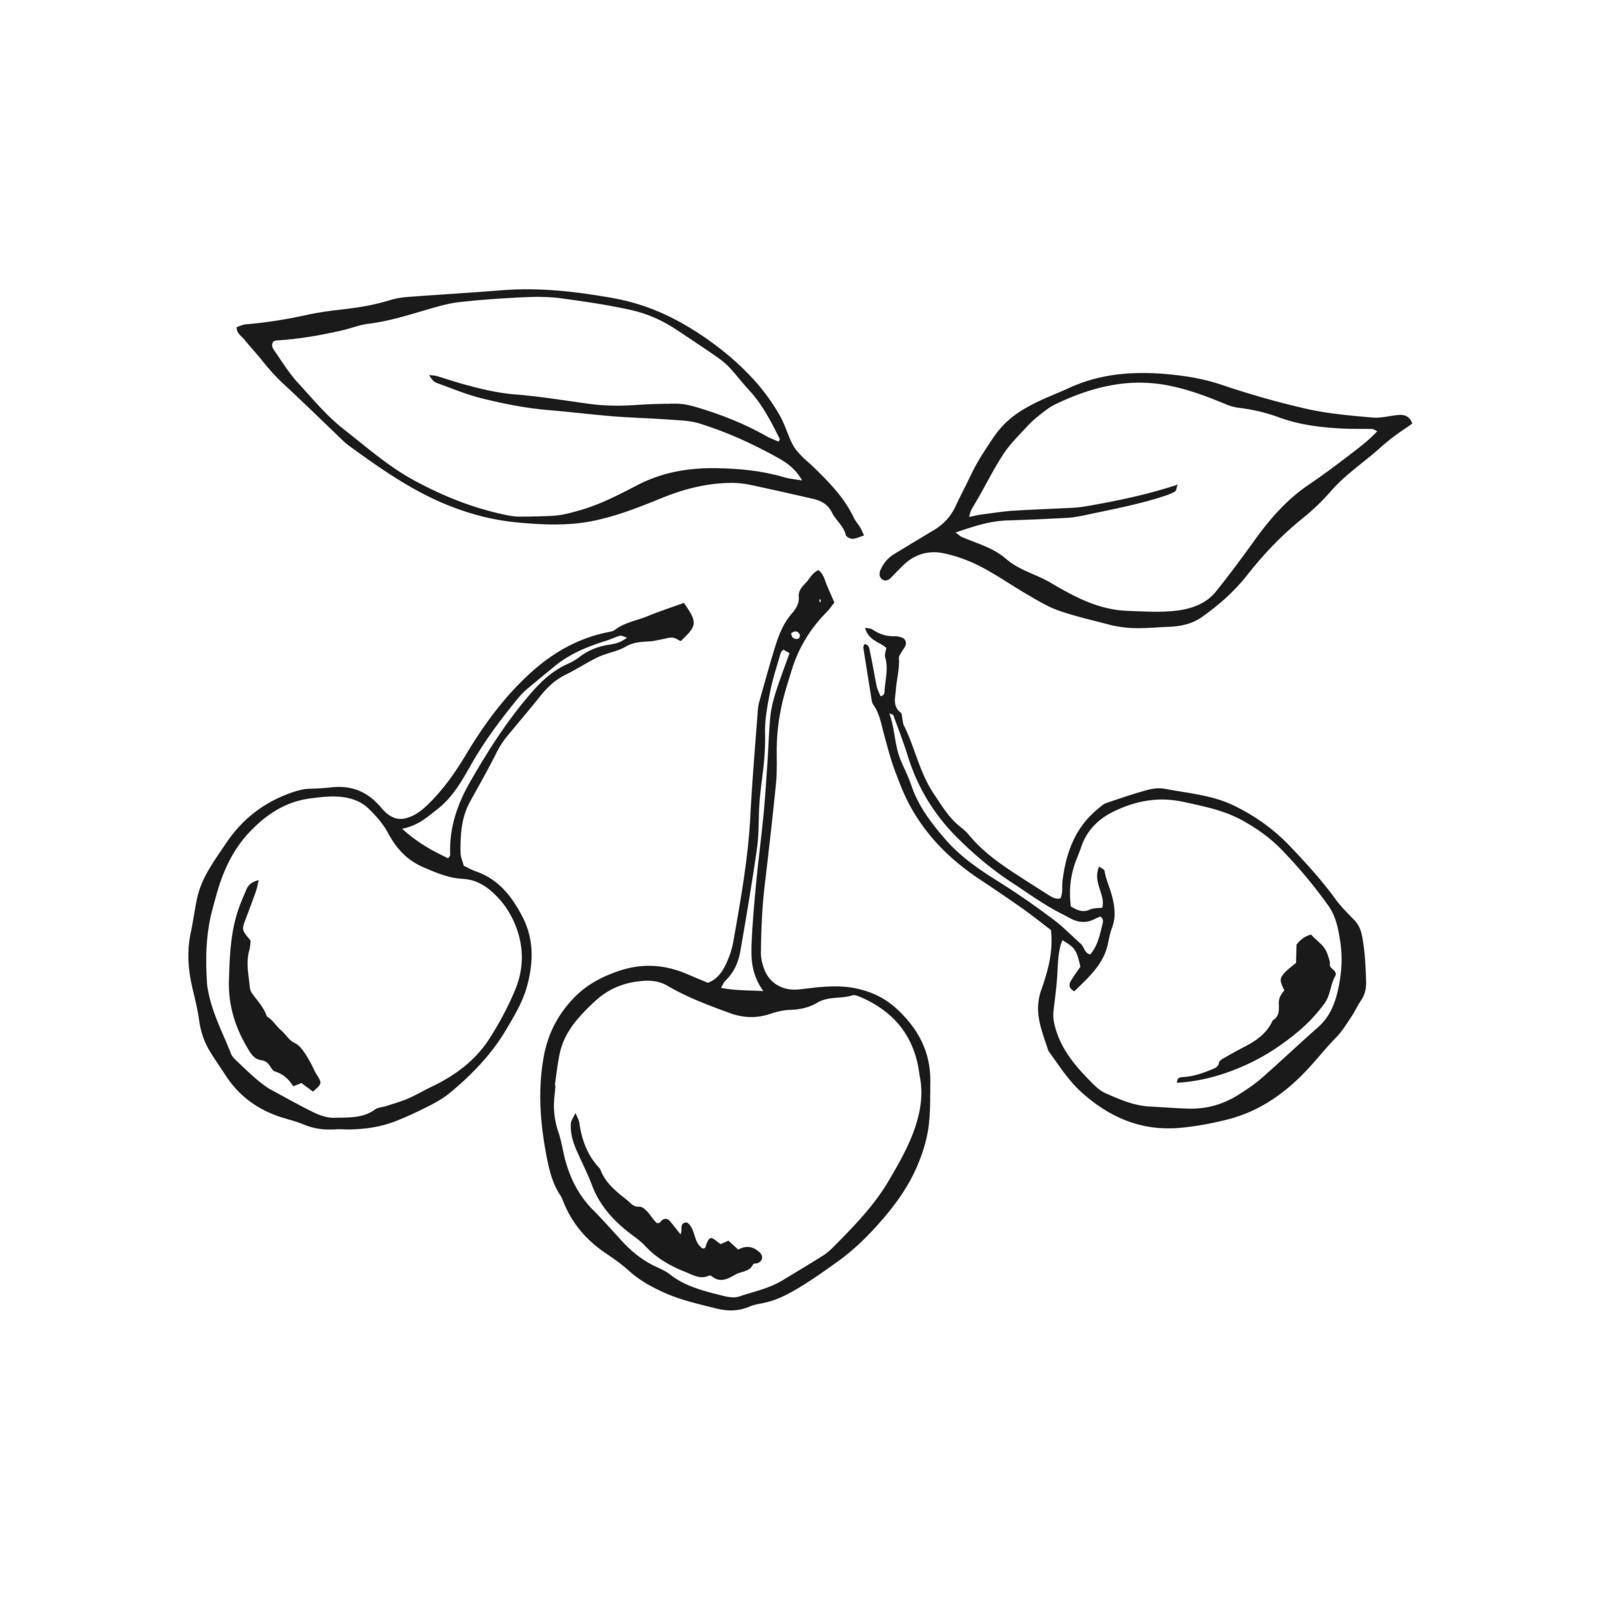 Cherry. Hand drawn illustration converted to vector.